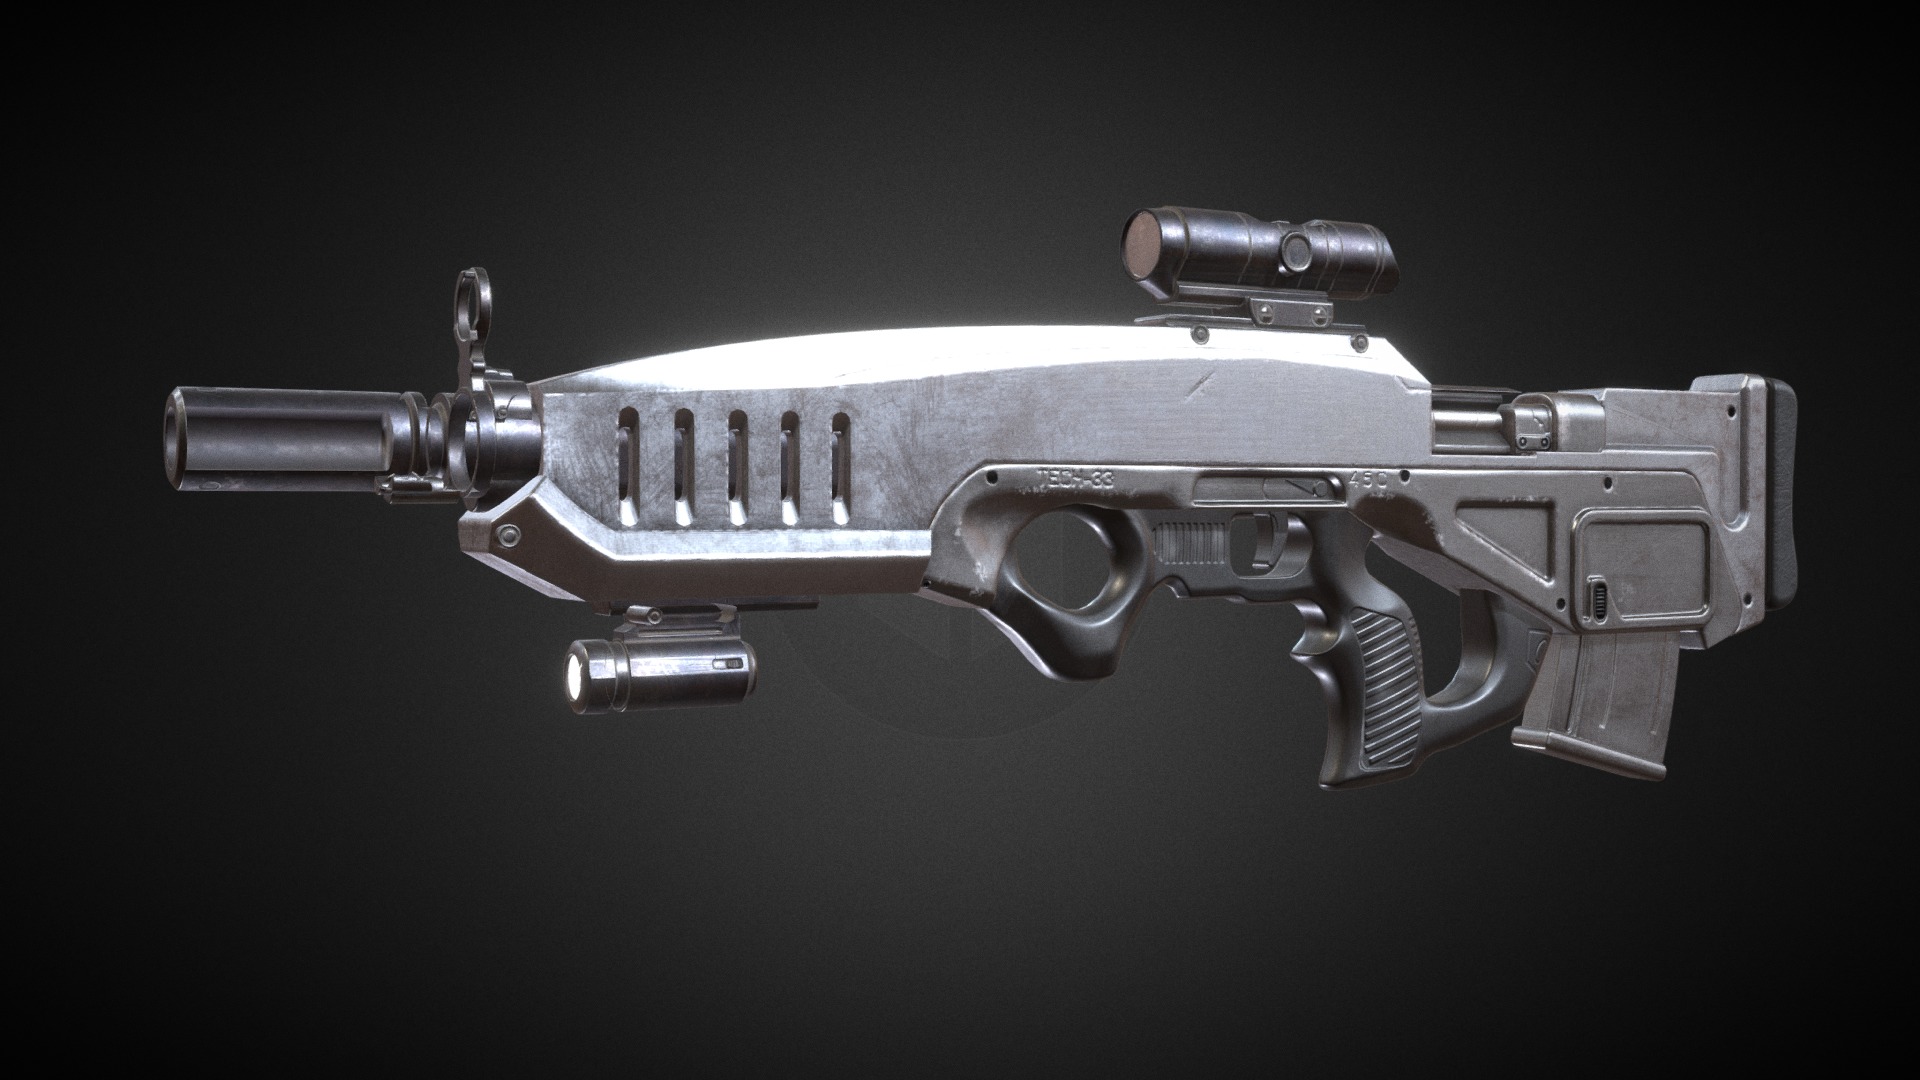 3D model rifled weapon - This is a 3D model of the rifled weapon. The 3D model is about a silver and black gun.